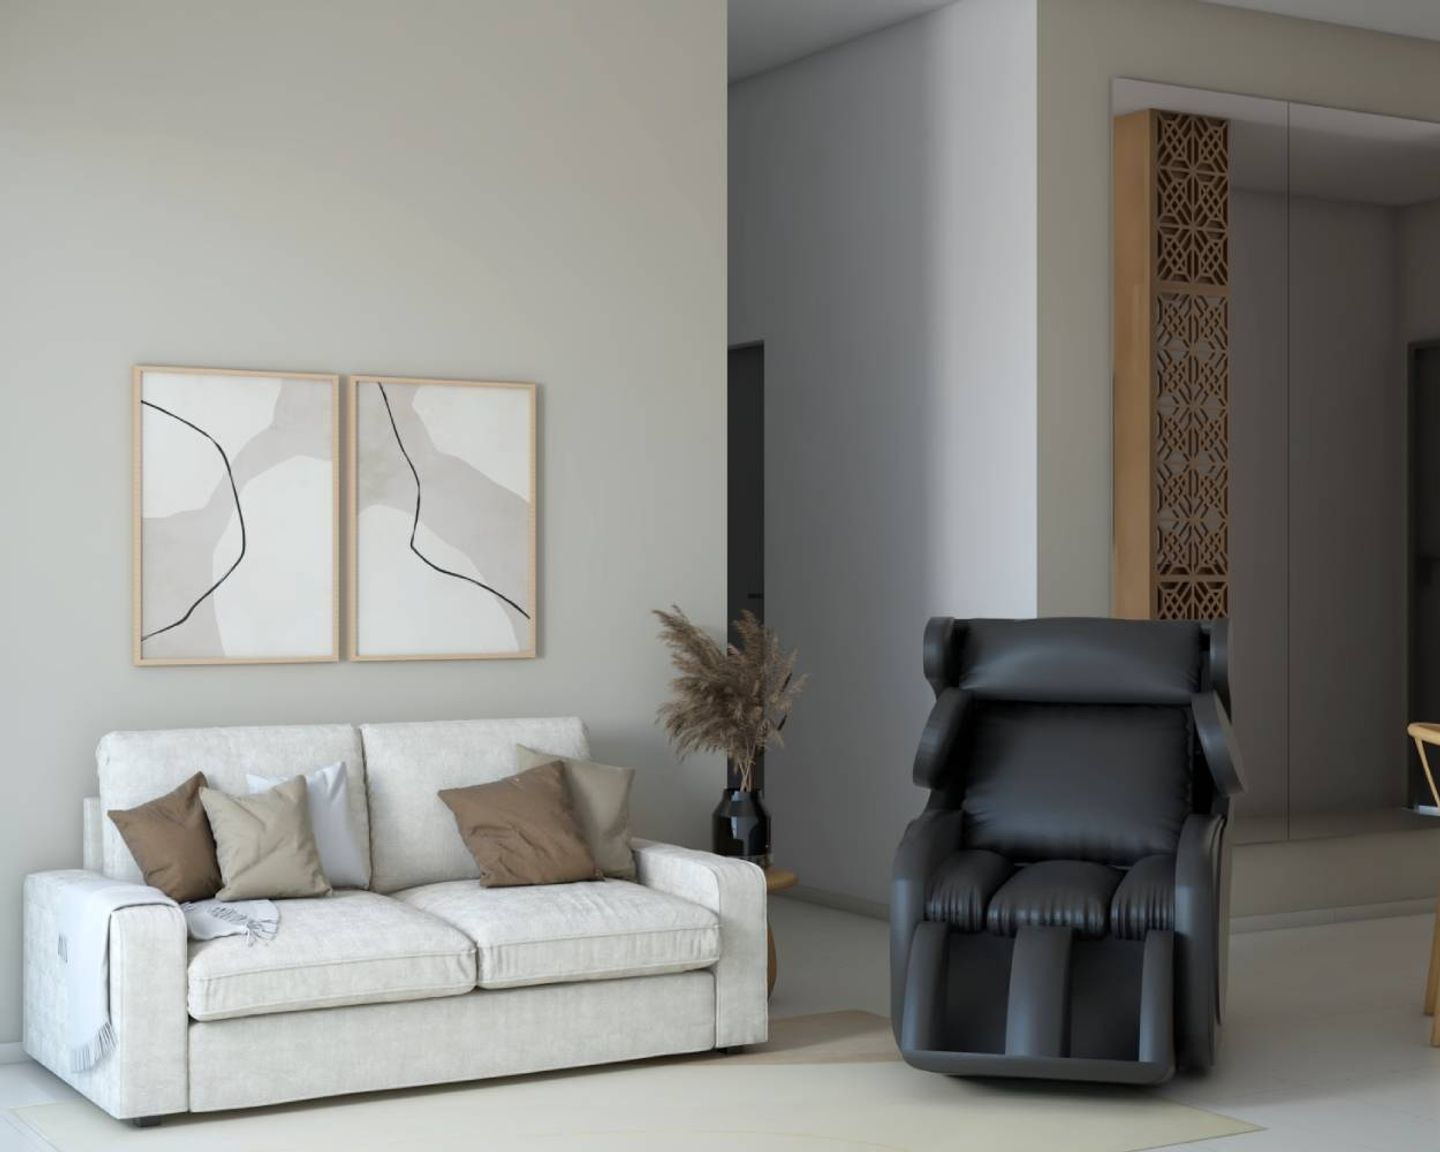 Compact Living Room Design With Off-White 2-Seater Sofa, Black Recliner Chair And Abstract Wall Art - Livspace